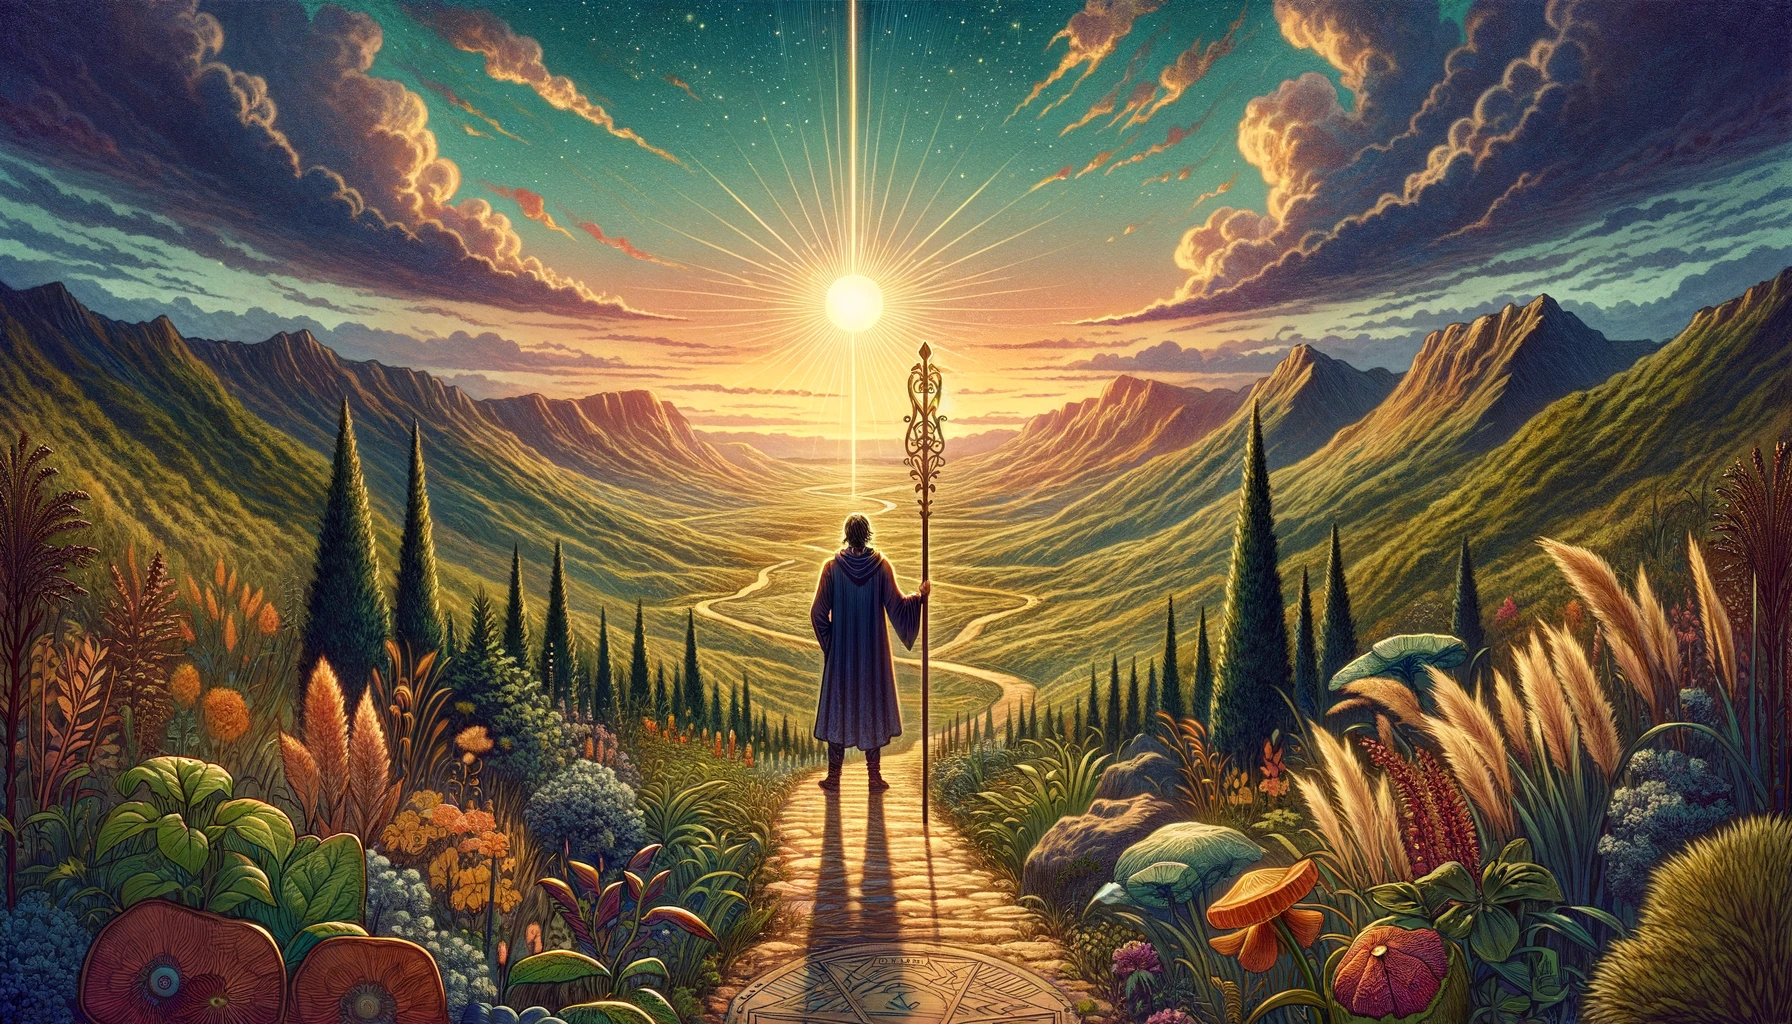 The image portrays a figure standing at the beginning of a path leading through uncharted territory, symbolizing exploration and discovery. They exhibit enthusiasm and a willingness to learn, set against a vibrant and varied landscape, conveying the excitement and energy of embarking on a new venture.